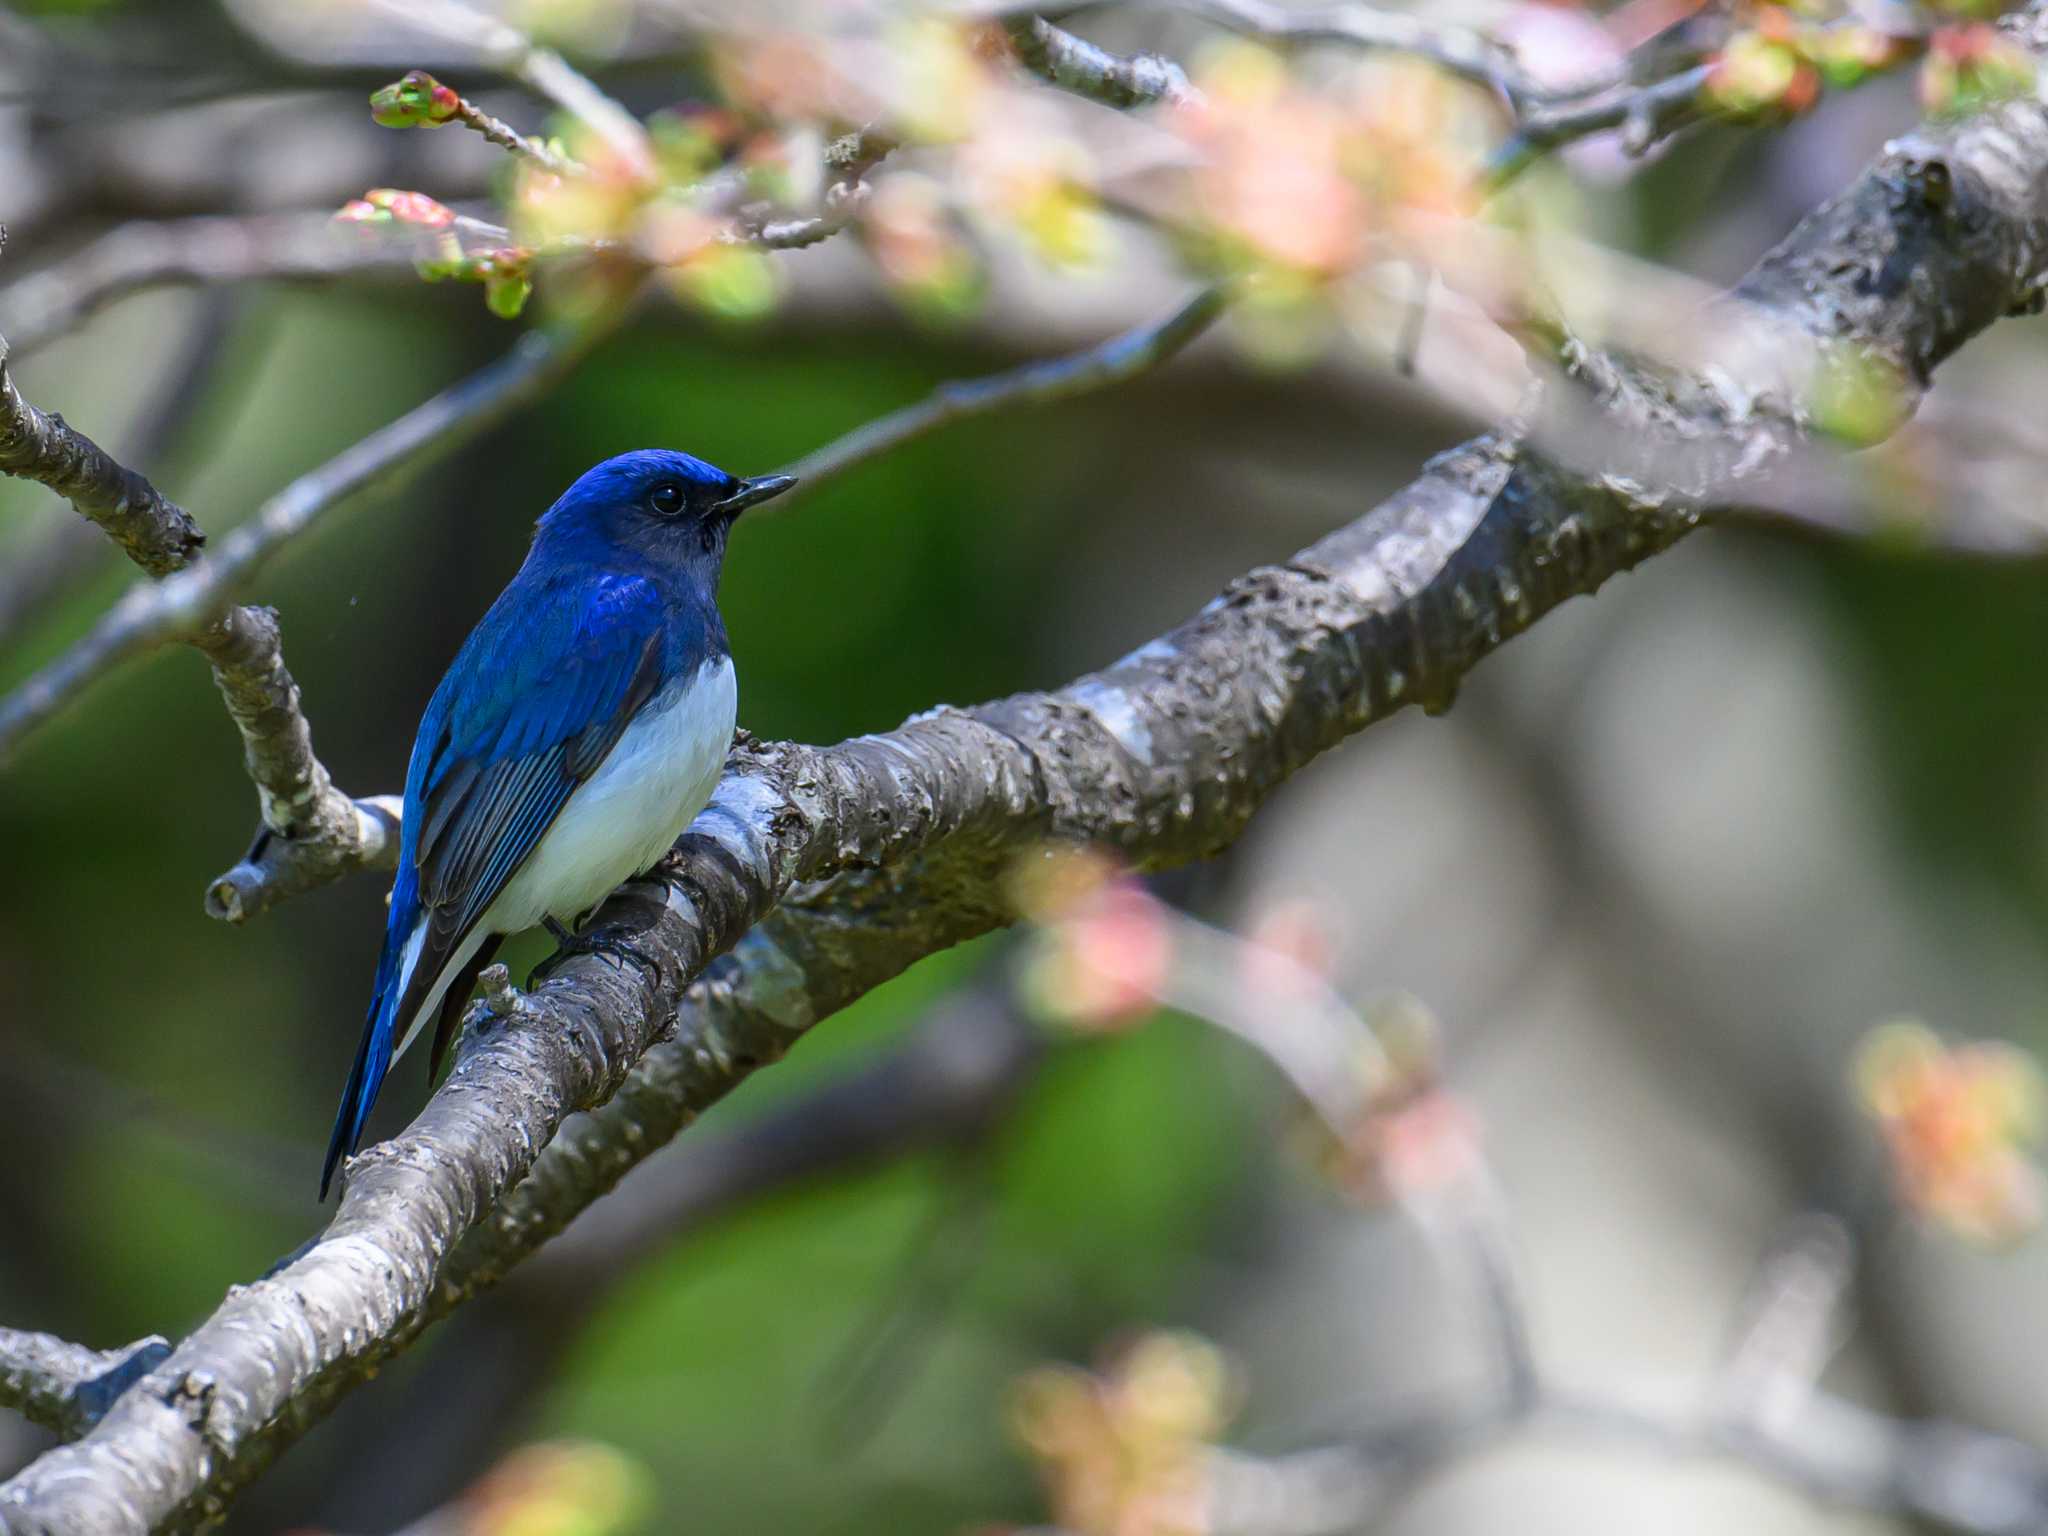 Photo of Blue-and-white Flycatcher at Nishioka Park by North* Star*